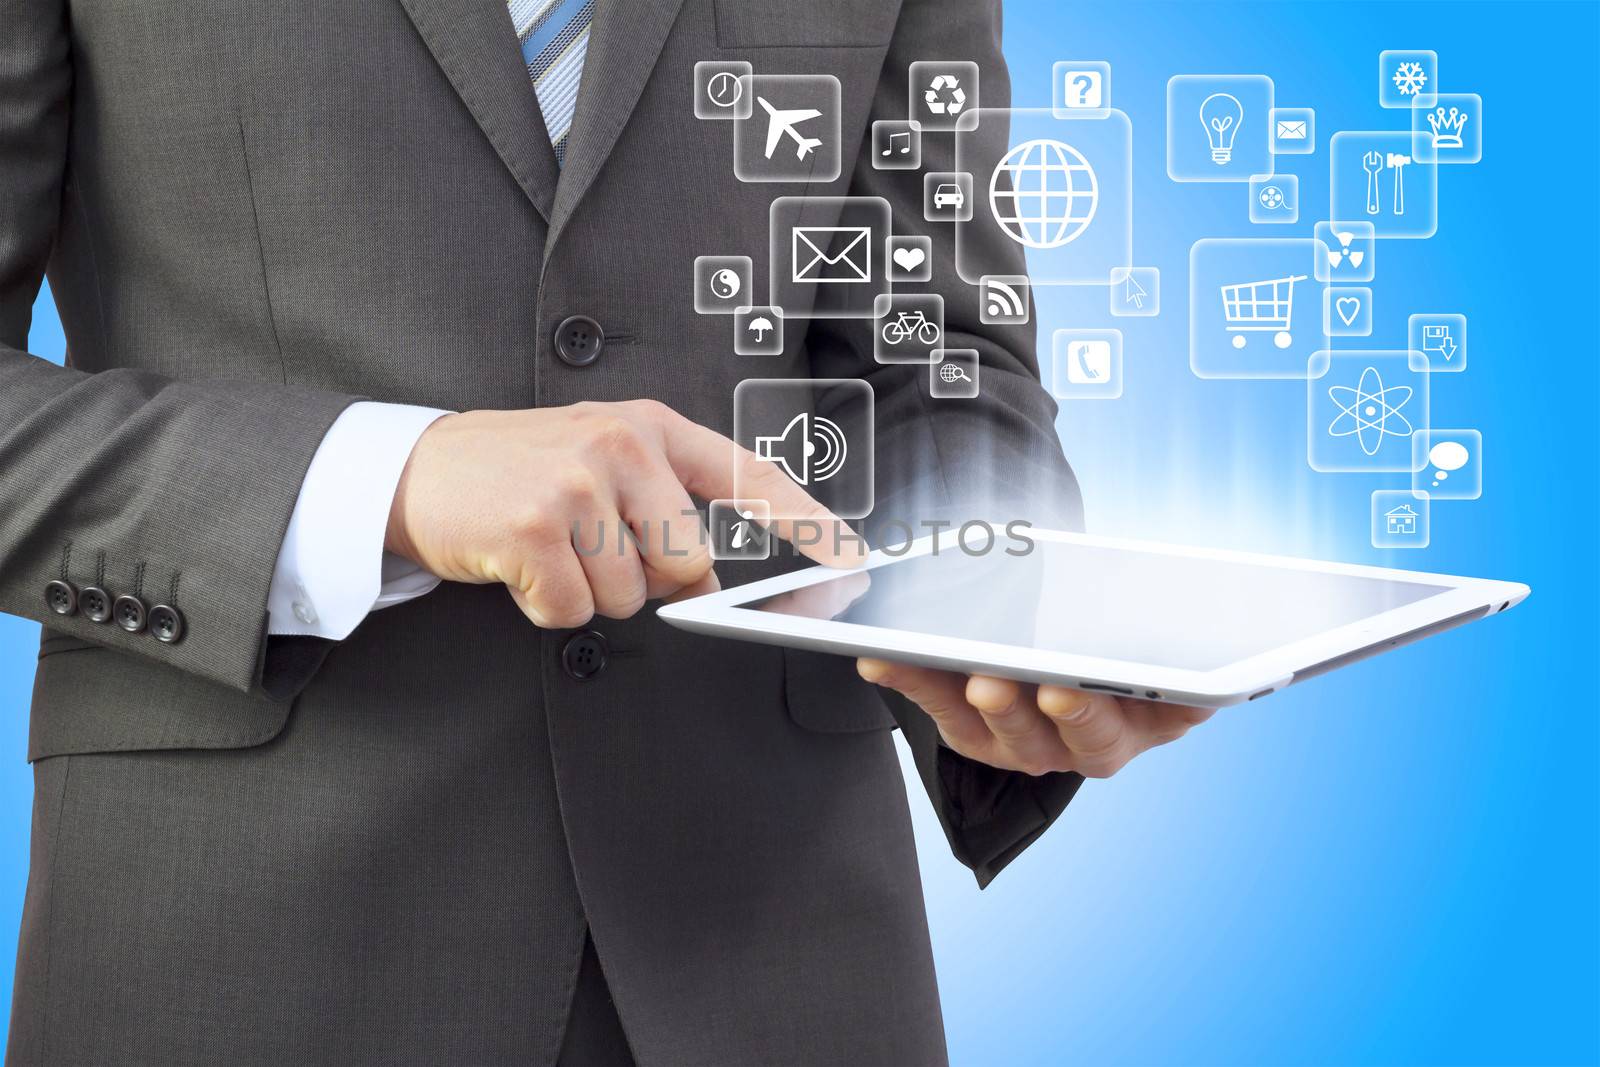 Businessman in a suit holding a tablet computer. Application icons are emitted from the tablet